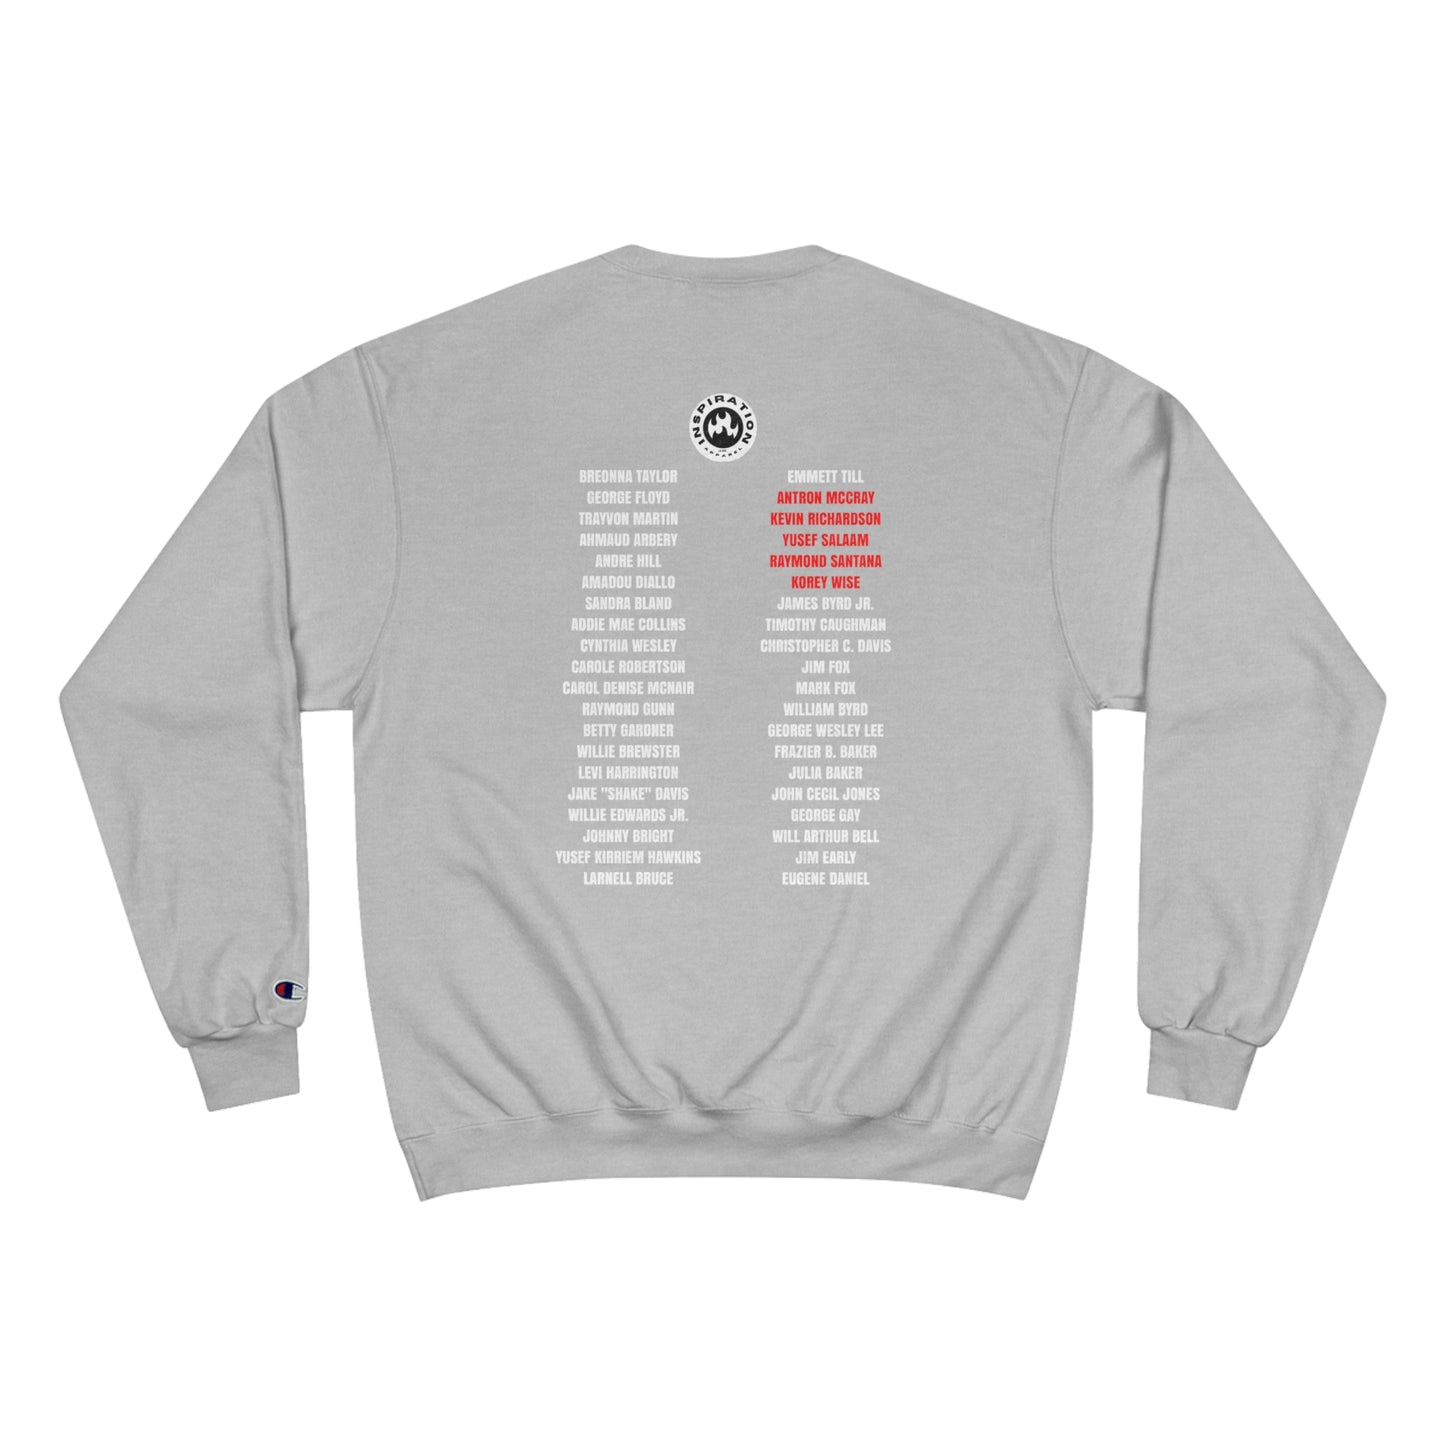 The Remember Series-The Central Park 5-Champion Sweatshirt